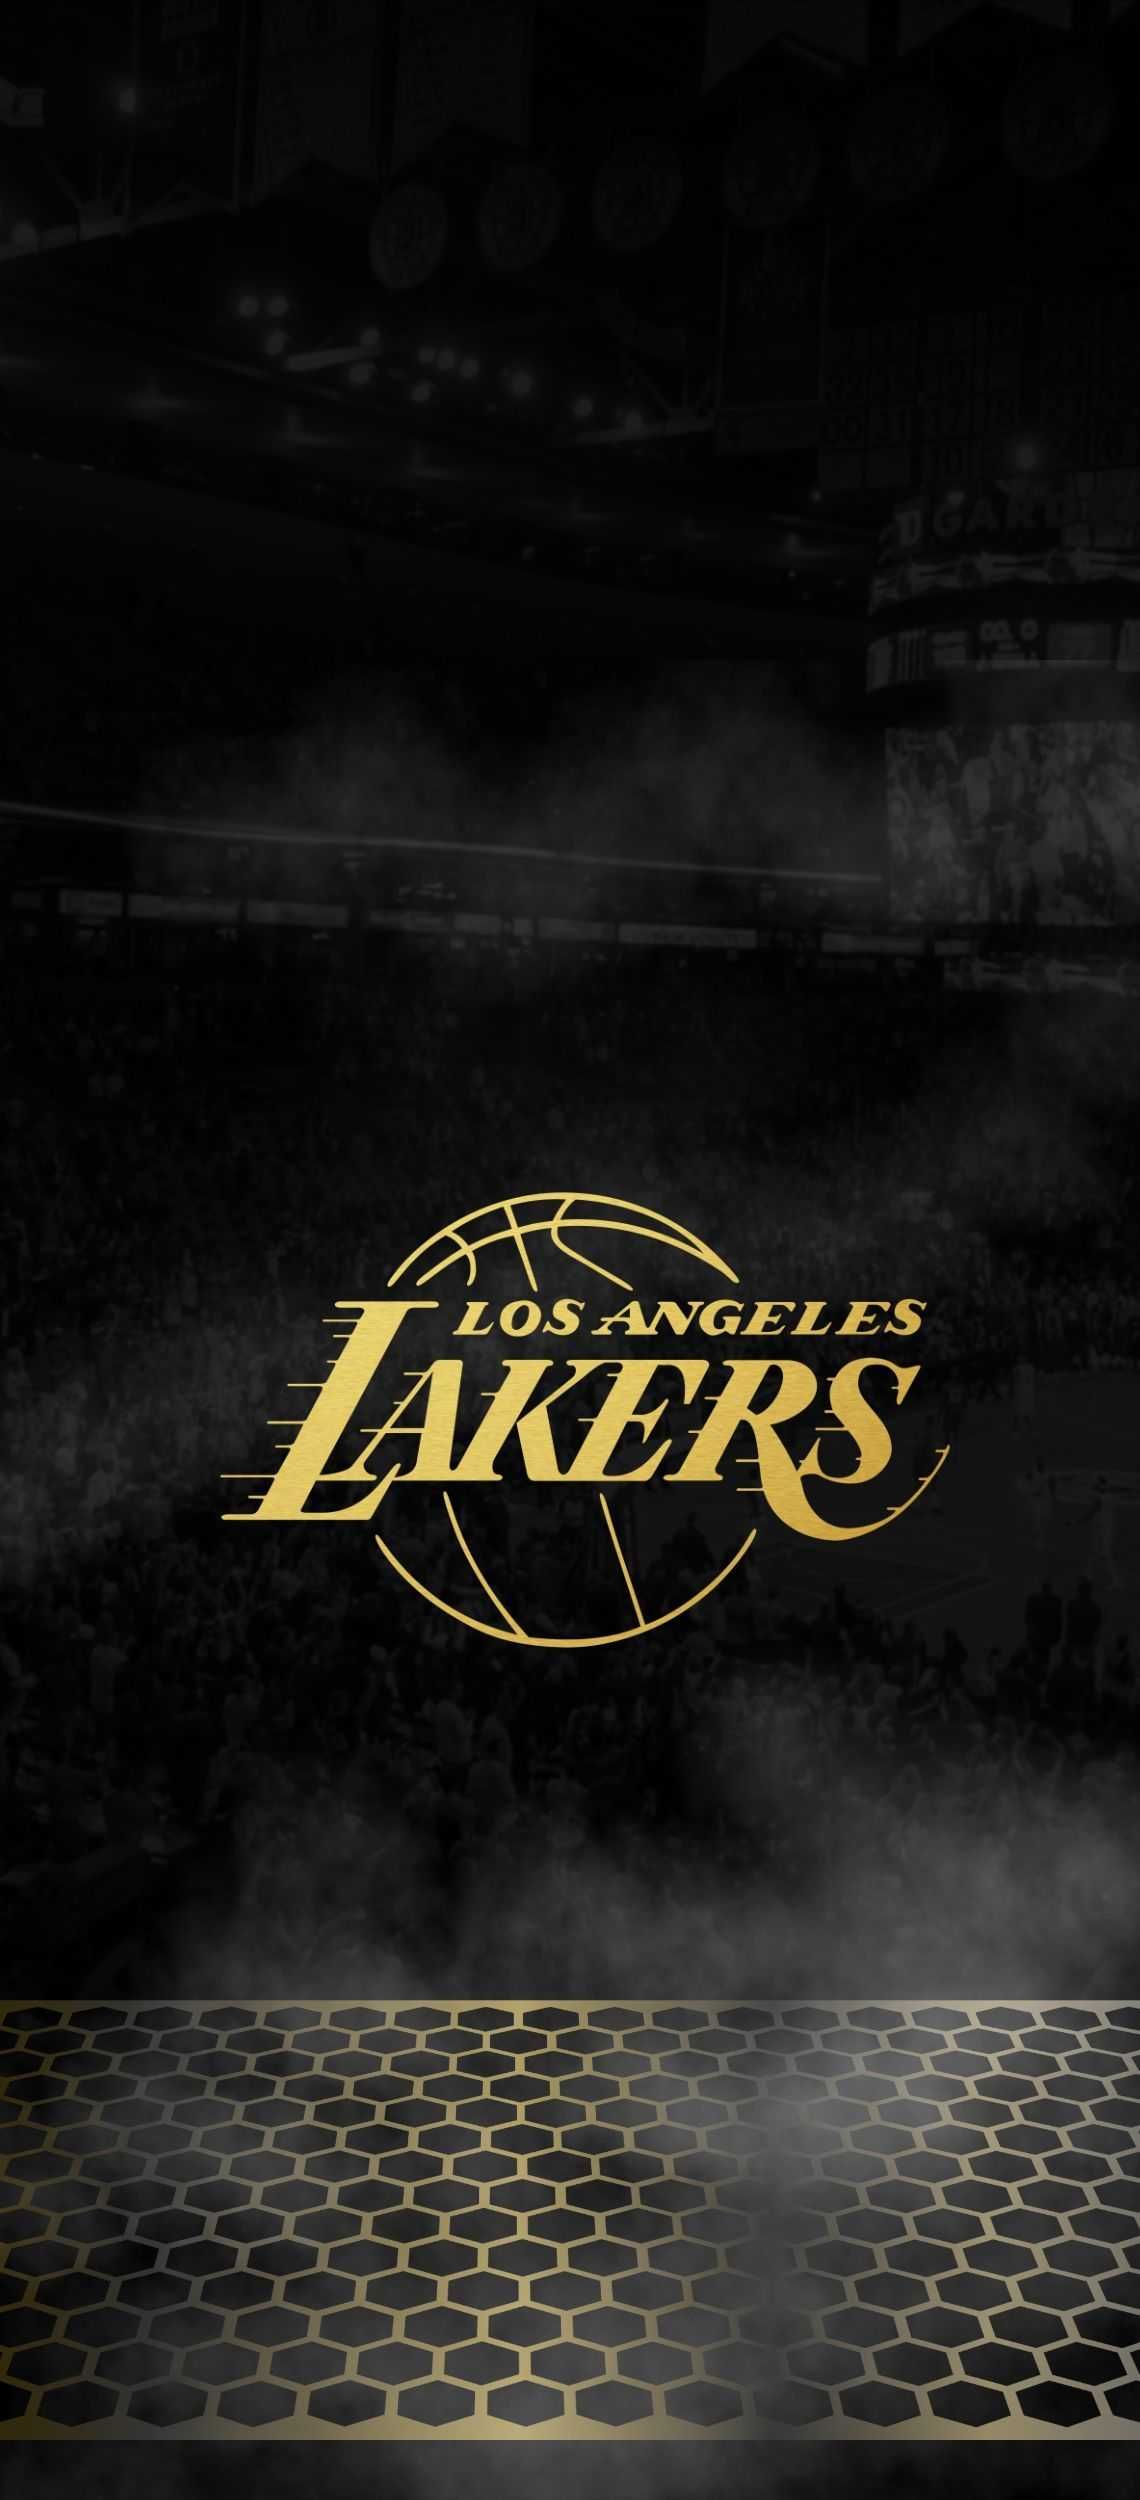 Lakers Wallpaper Discover more Background, Black, cool, high resolution,  Iphone wallpapers.